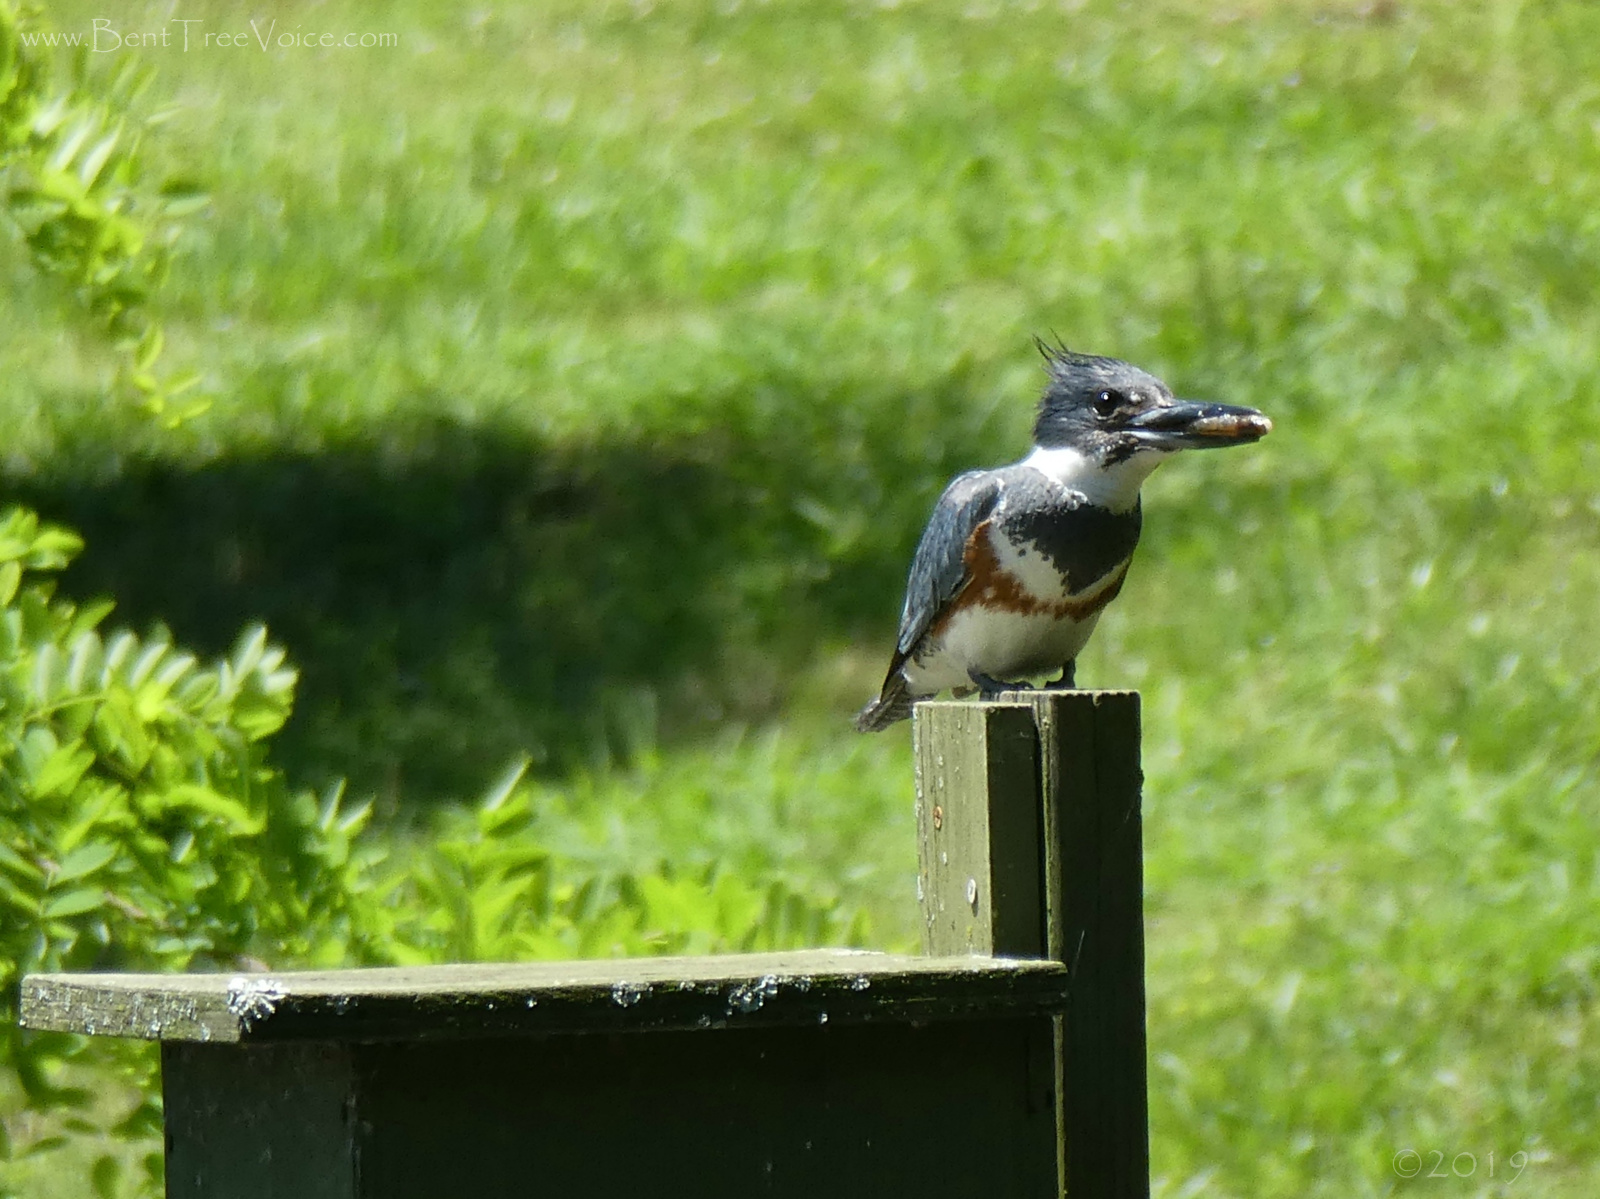 May 14, 2019 - Belted Kingfisher with fish in Bent Tree